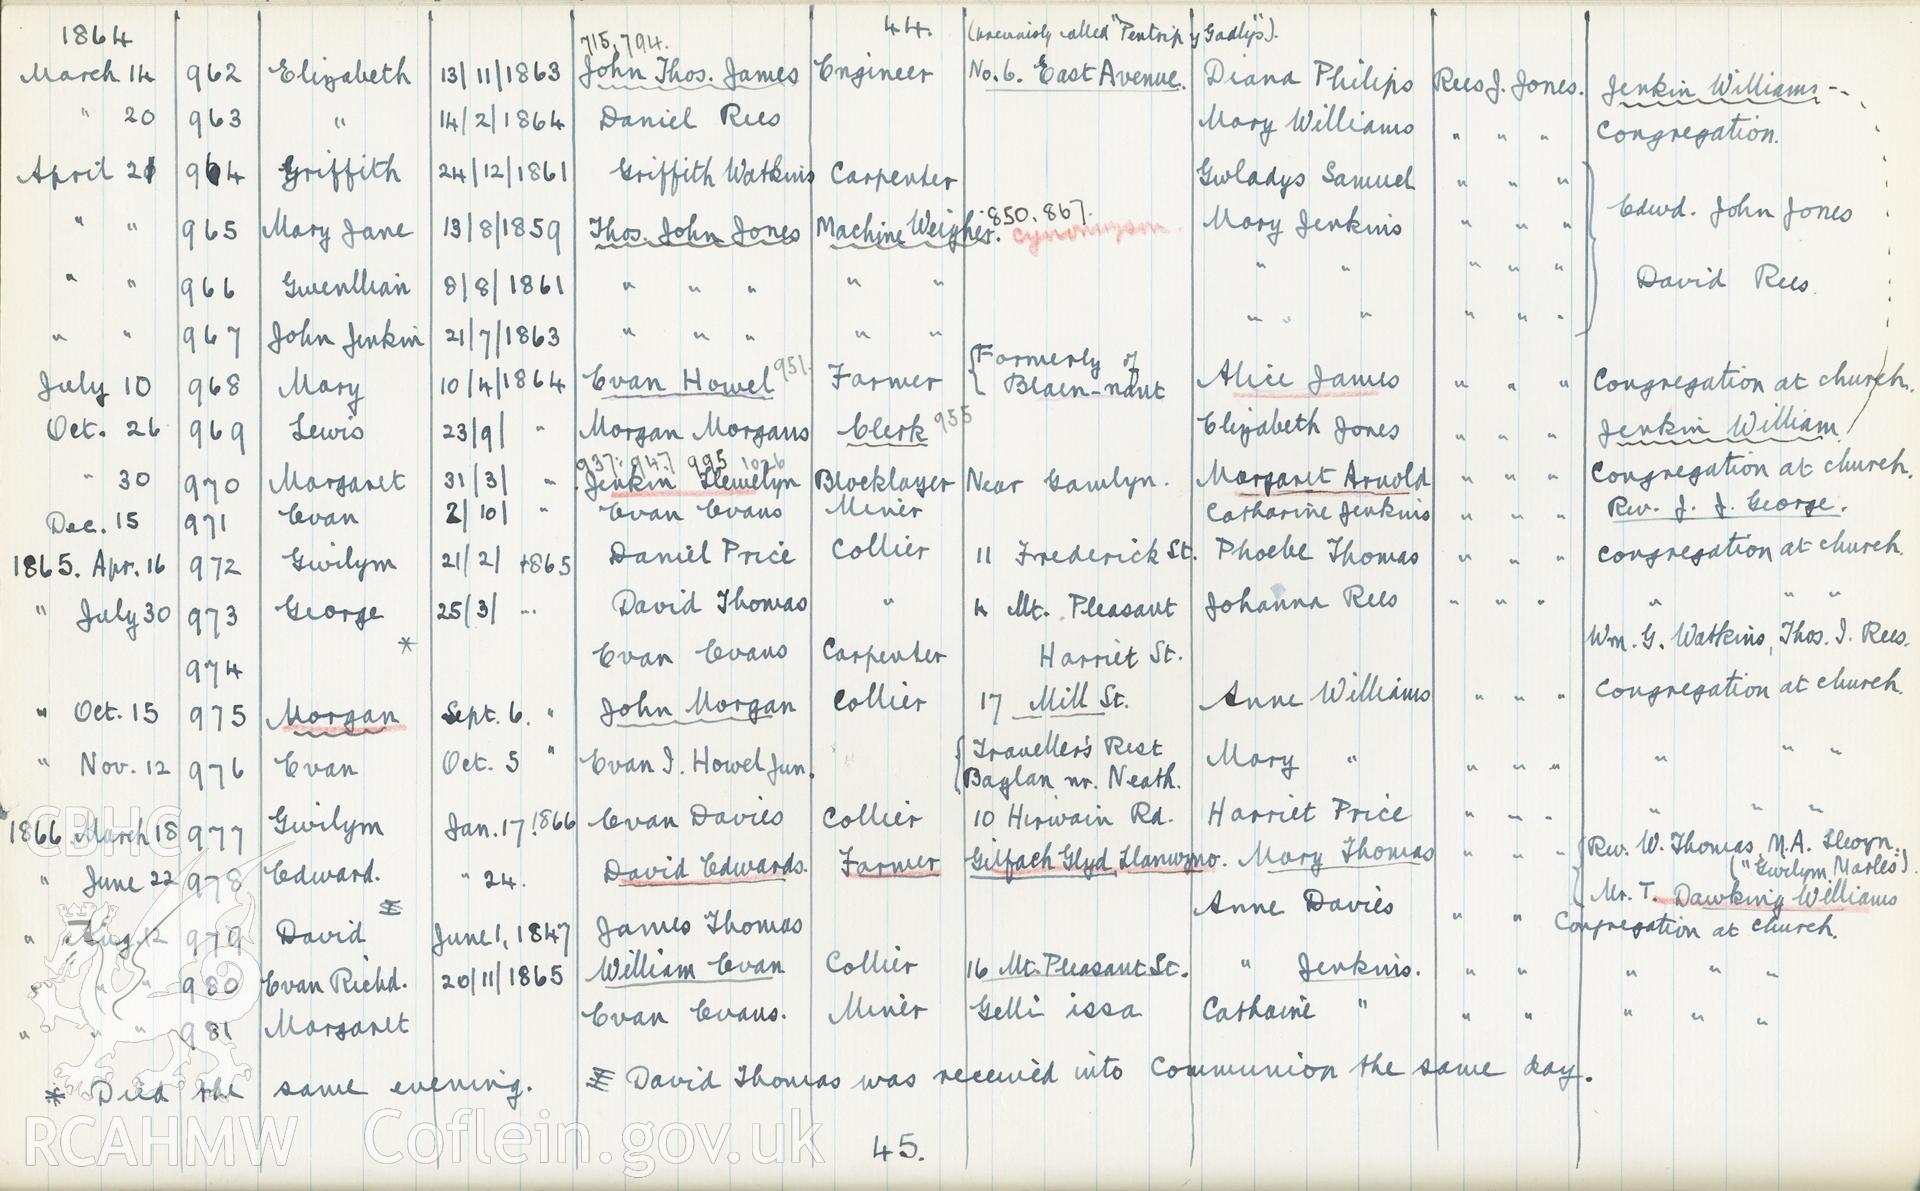 "Baptism Registered" book for Hen Dy Cwrdd, made between April 19th and 28th, 1941, by W. W. Price. Page listing baptisms from 14th March 1864 to 12th August 1866. Donated to the RCAHMW as part of the Digital Dissent Project.